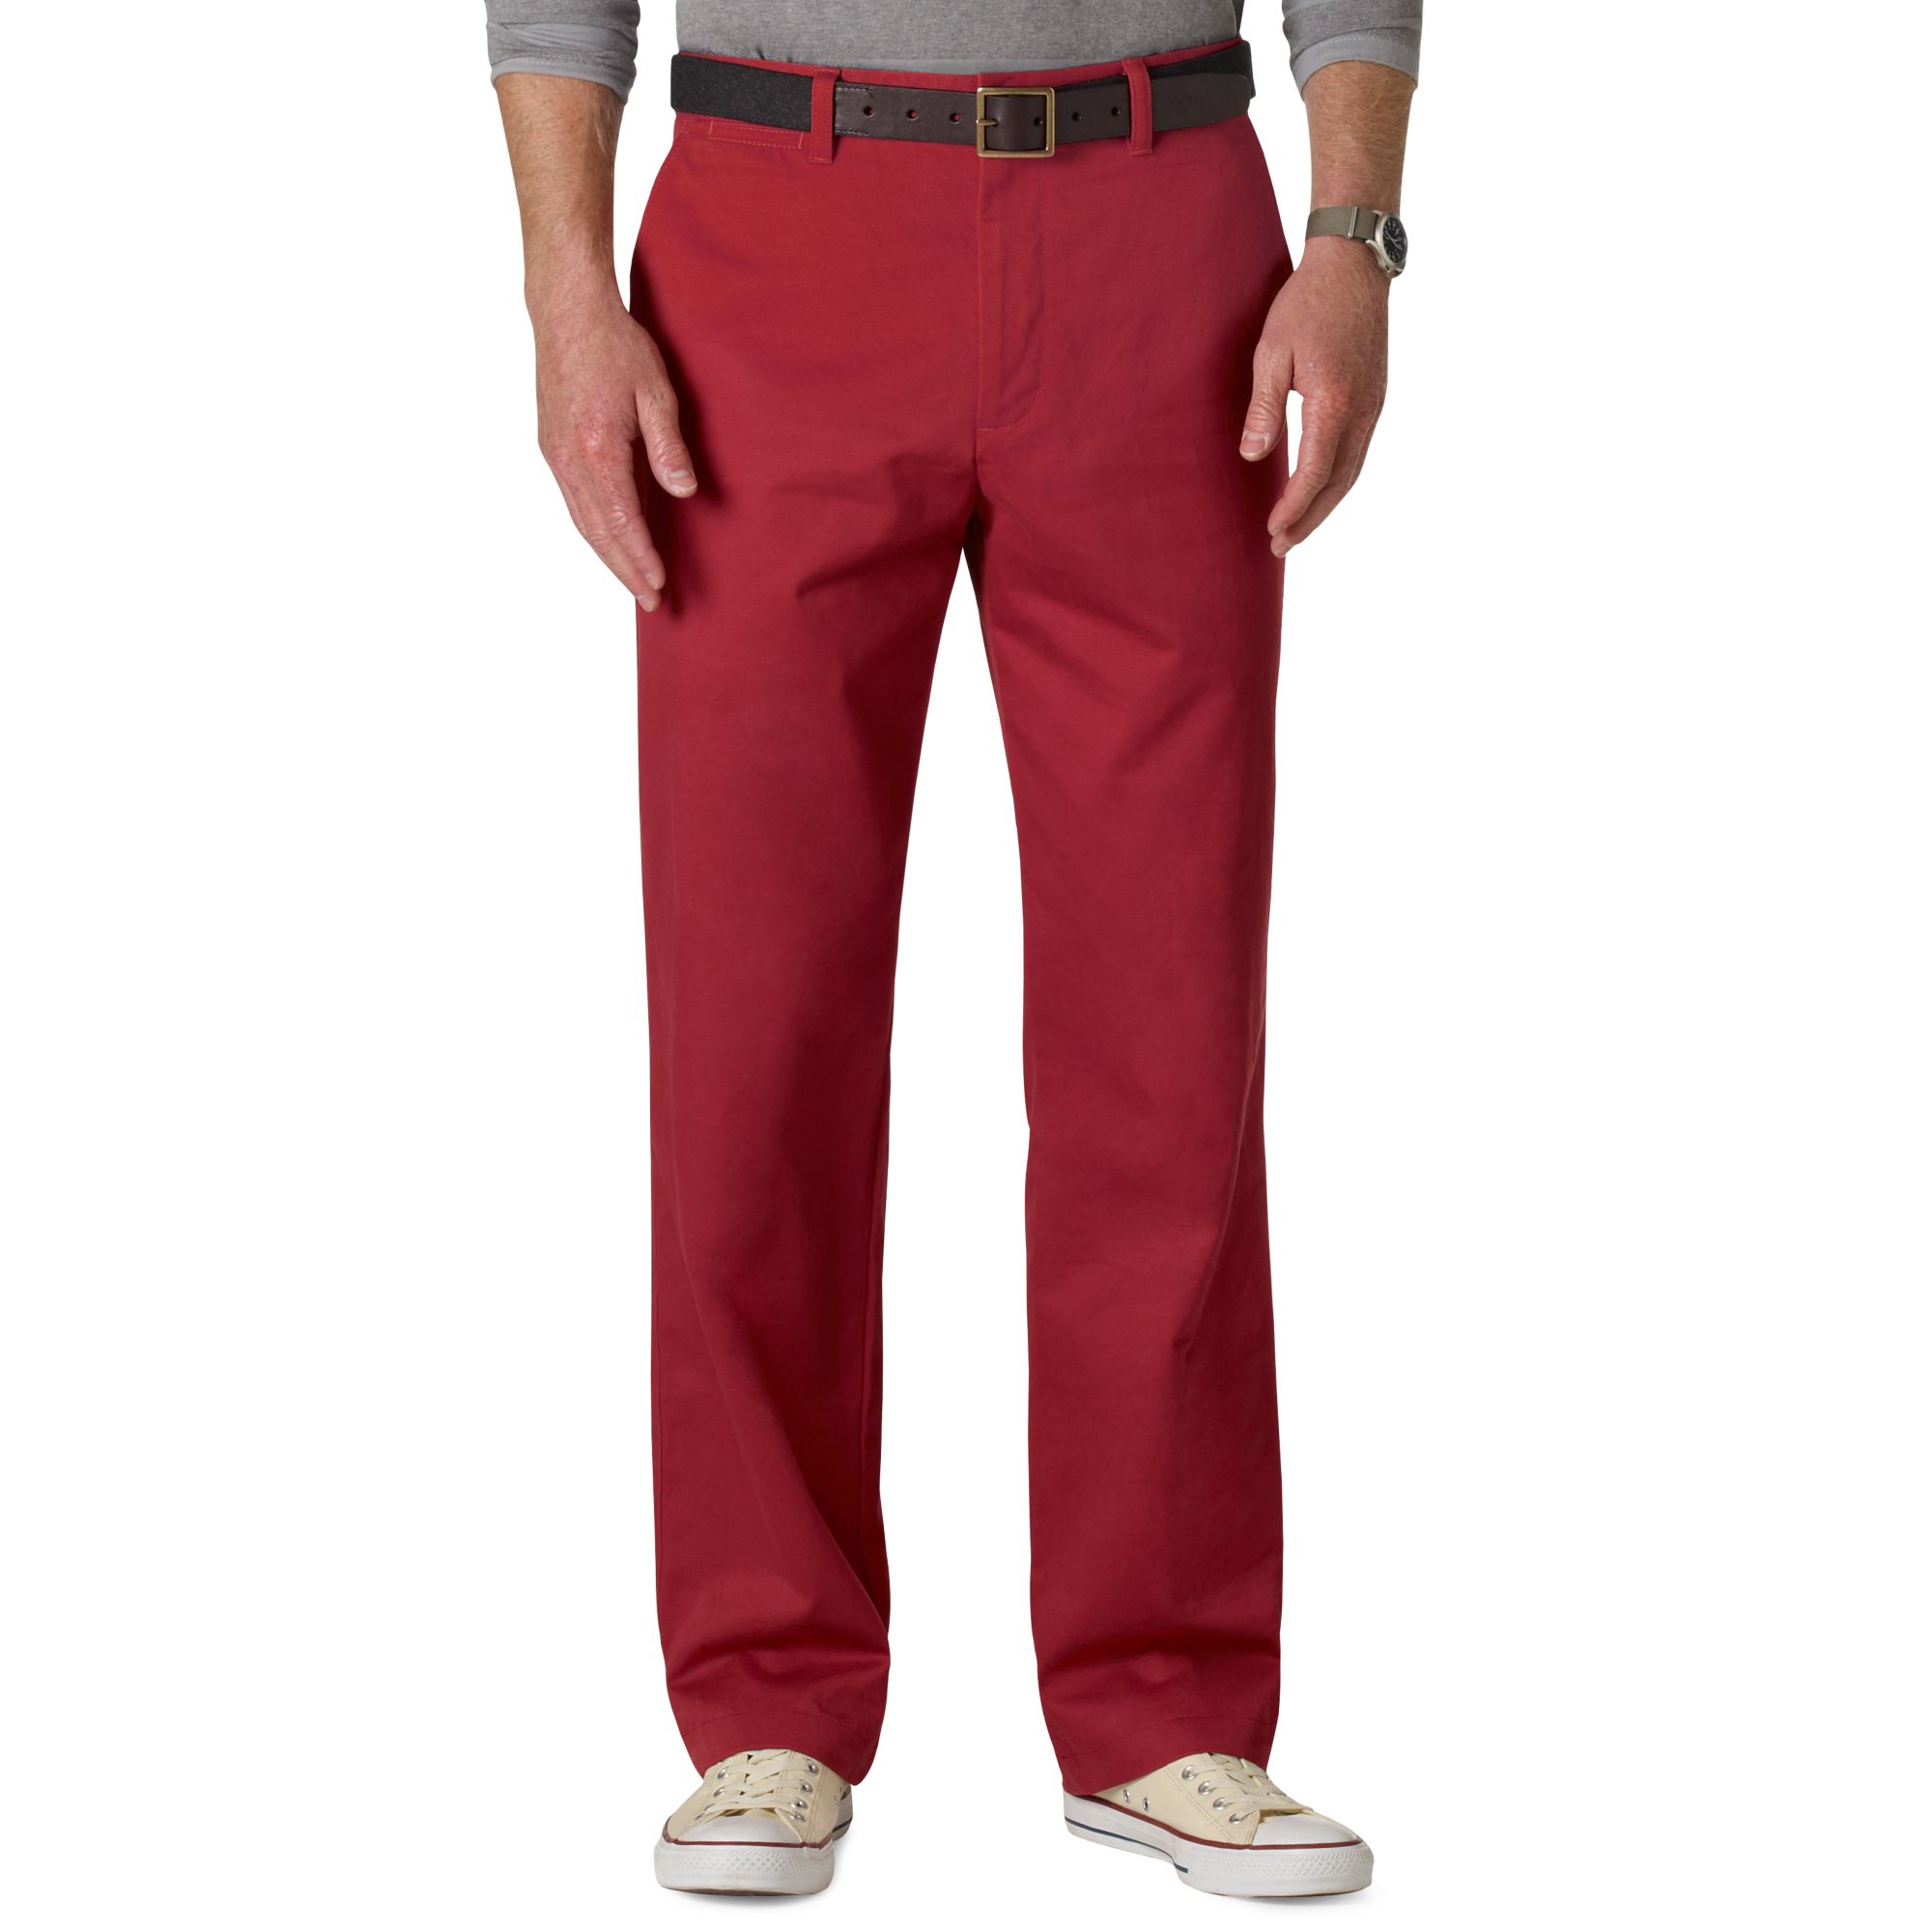 Dockers Classicfit Flat Front Game Day Khaki Washington State Pants in ...